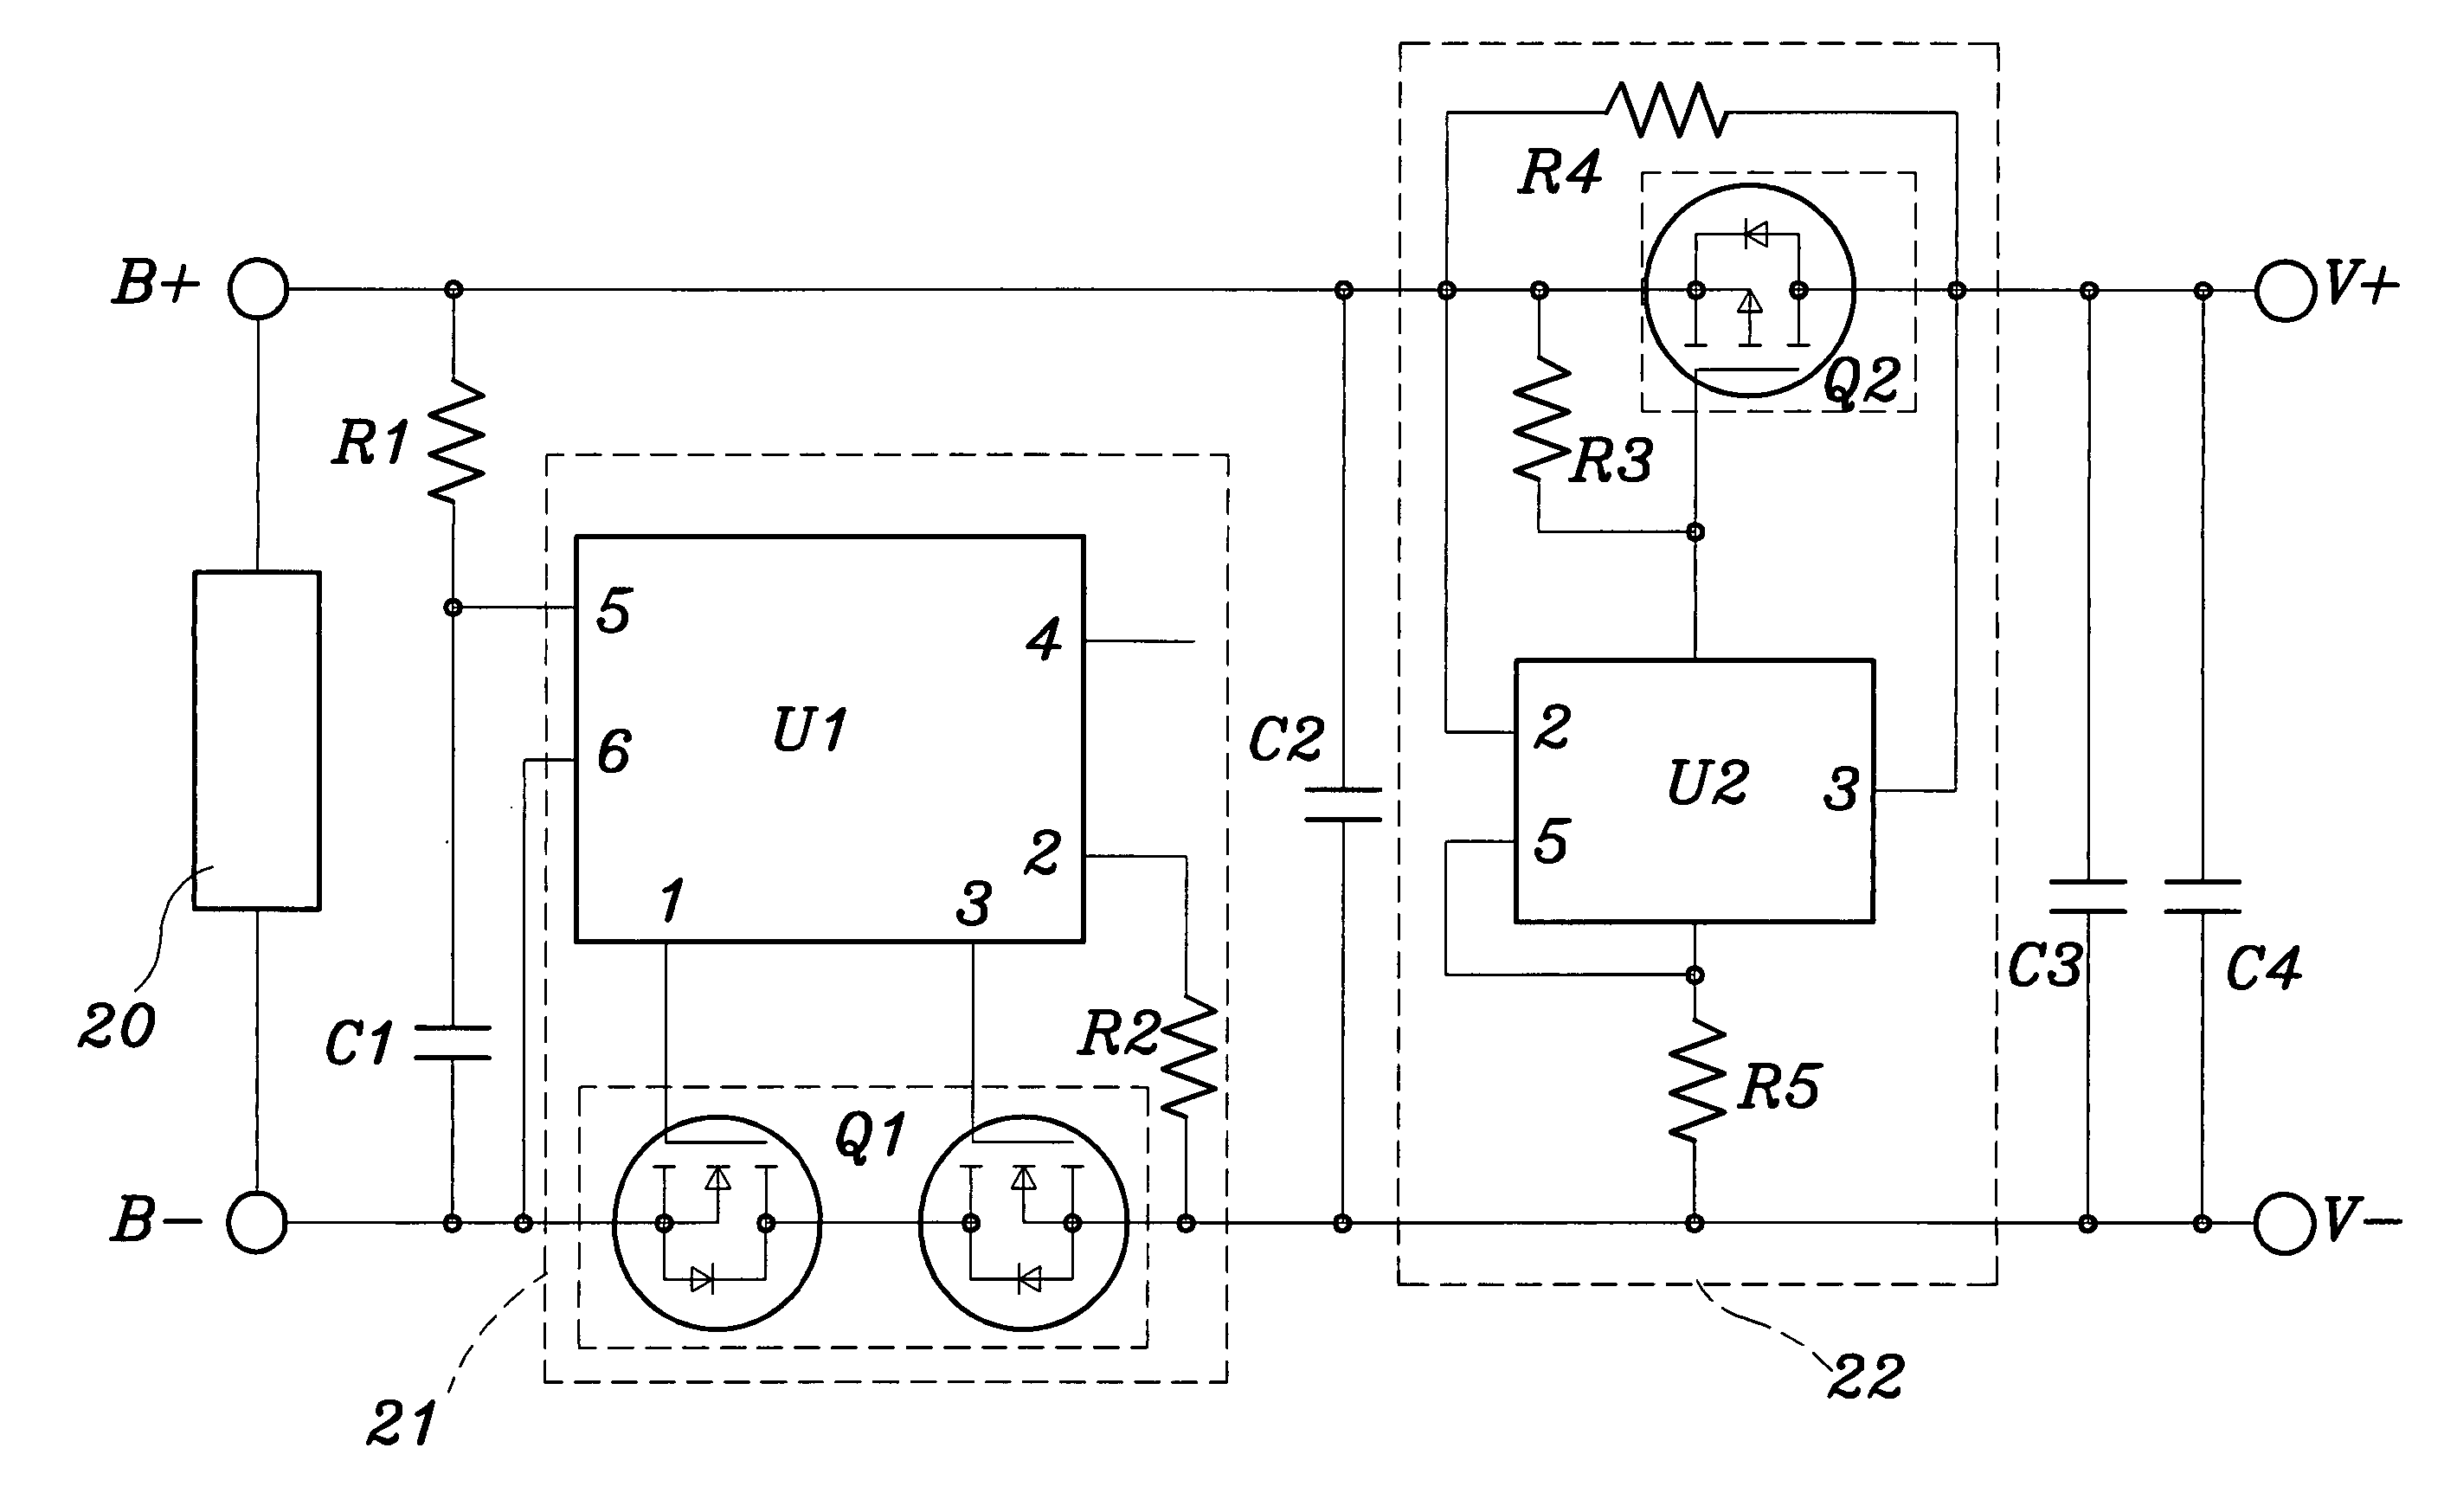 Circuit structure for rechargeable battery